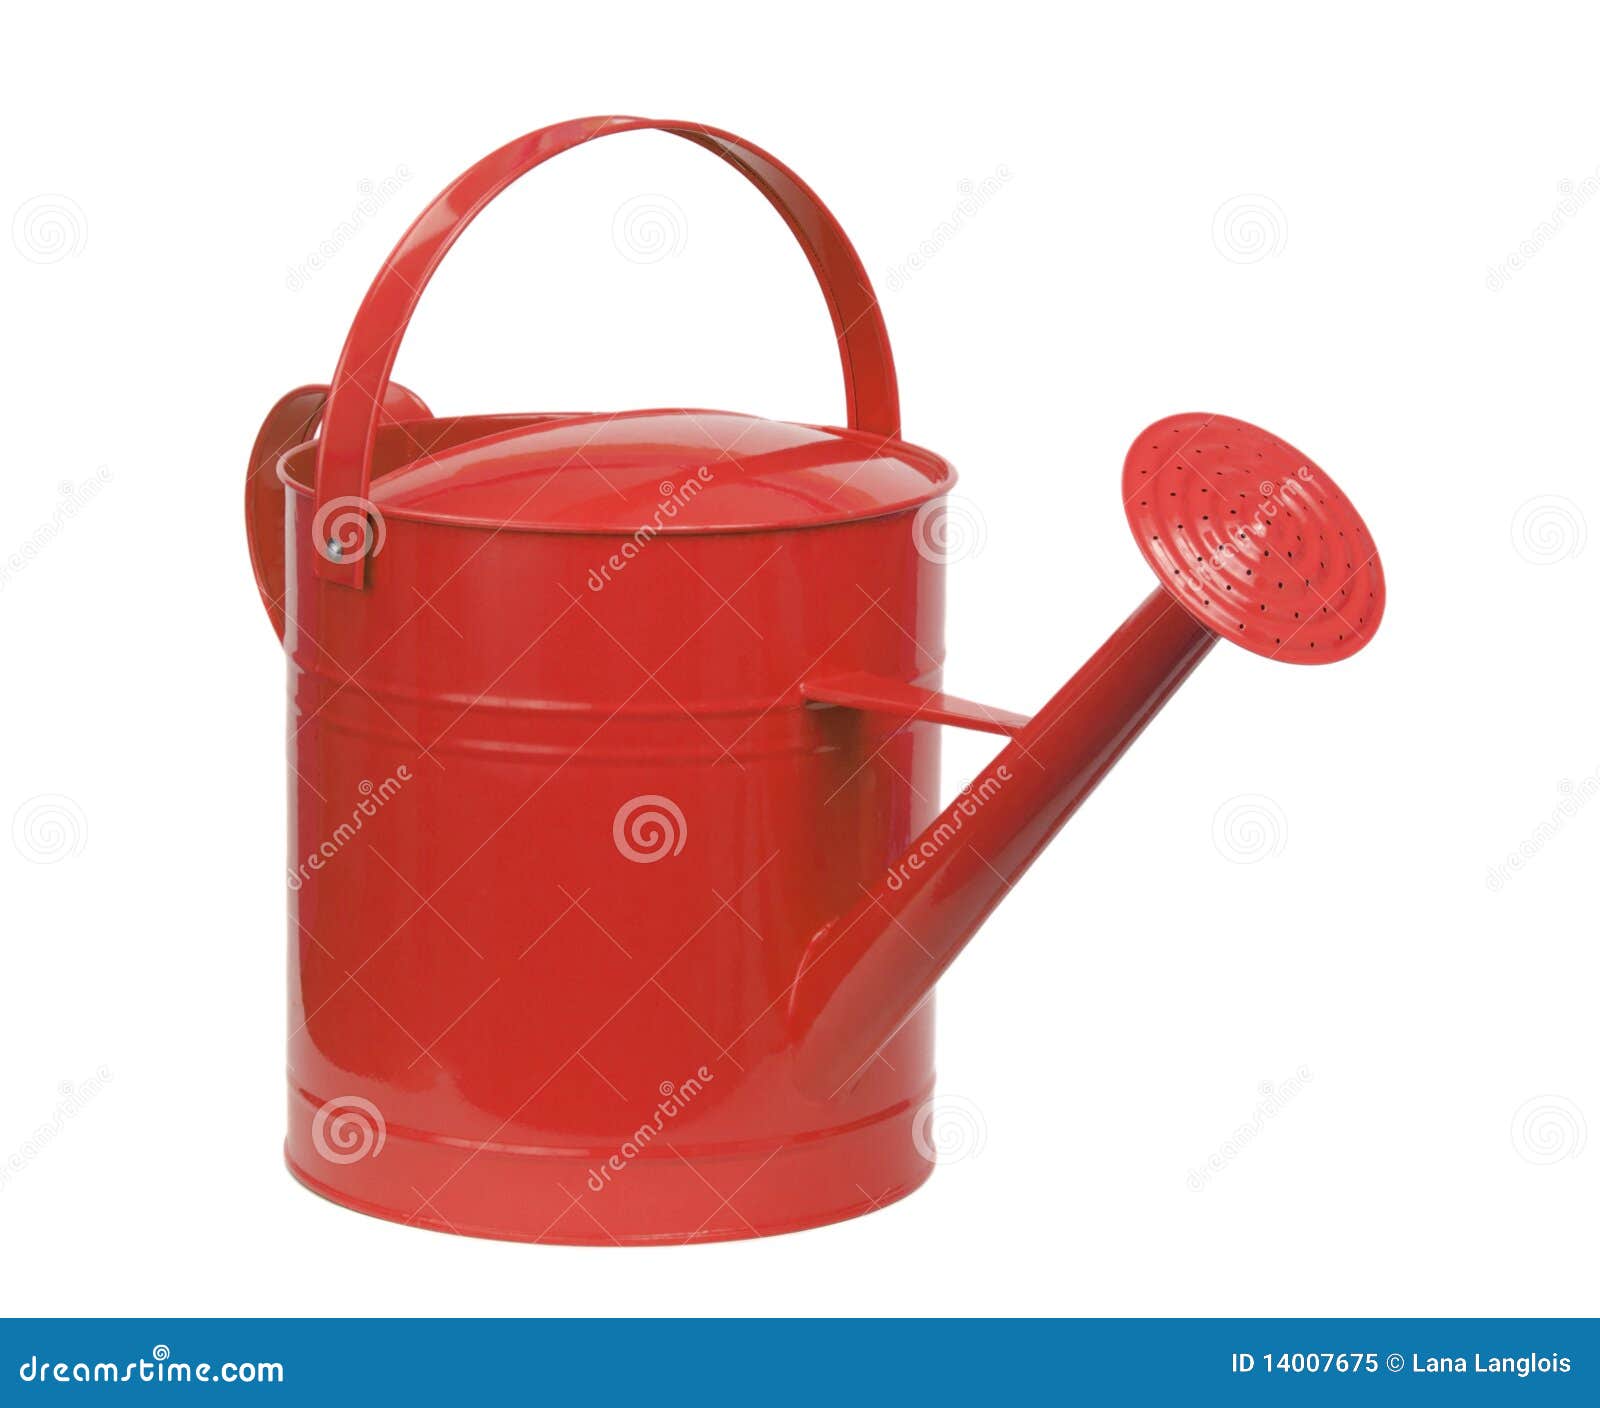 Watering can stock image. Image of container, gardening - 14007675